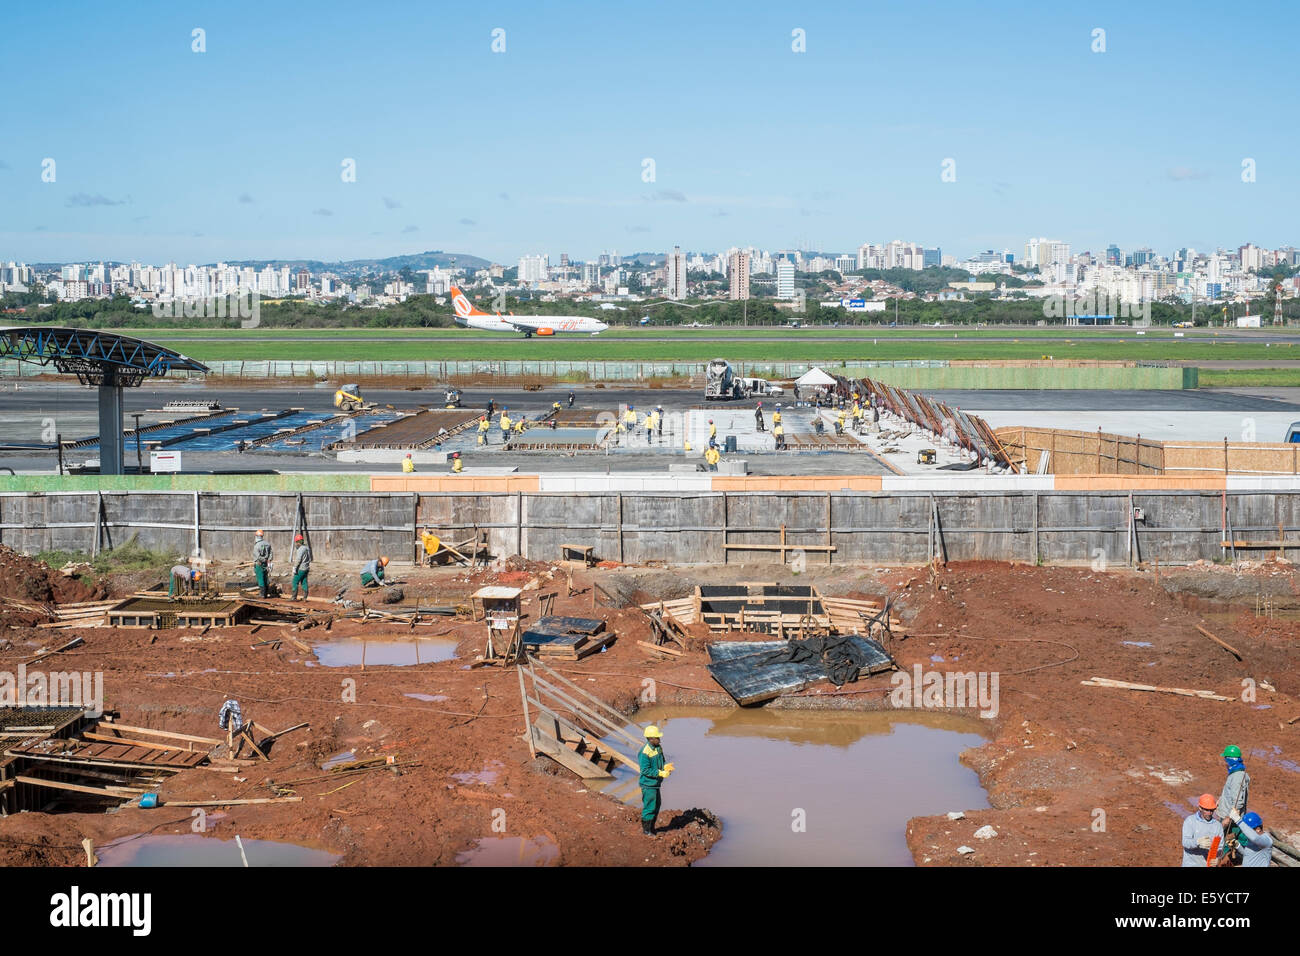 PORTO ALEGRE, BRAZIL - JULY 25: A Brazilian airplane lands next to Salgado Filho's airport expansion works. The expansion was in Stock Photo